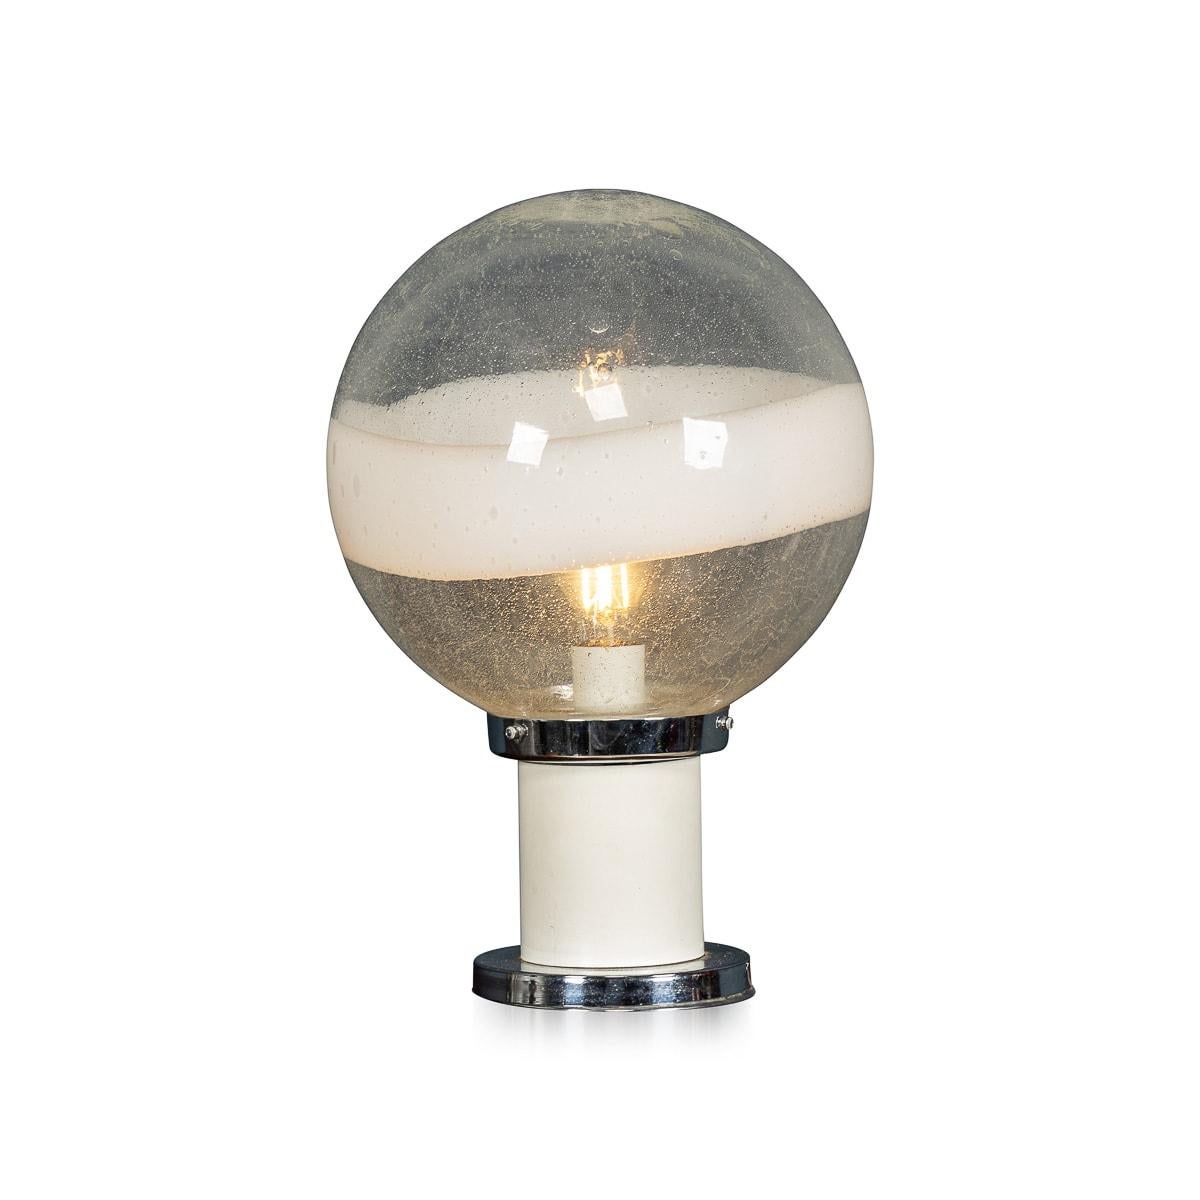 A refined chrome and glass table lamp, originating from Italy in the midst of the 20th century. This exquisite piece of lighting artistry boasts a chrome stand that elegantly supports a meticulously handcrafted glass ball, a testament to the